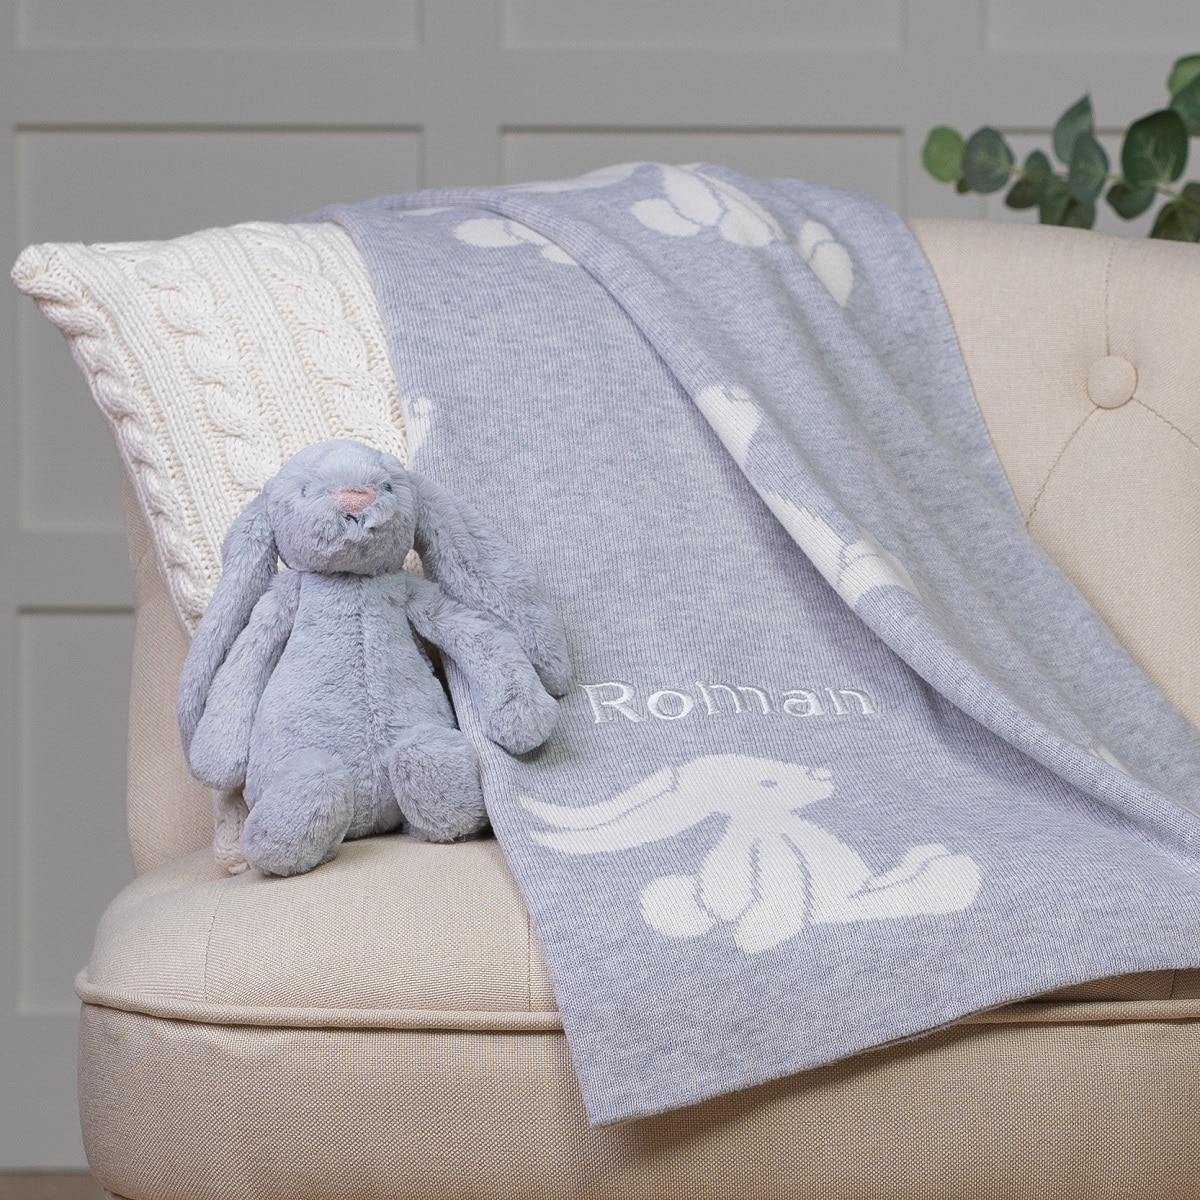 Personalised Jellycat silver bashful bunny and baby blanket gift set